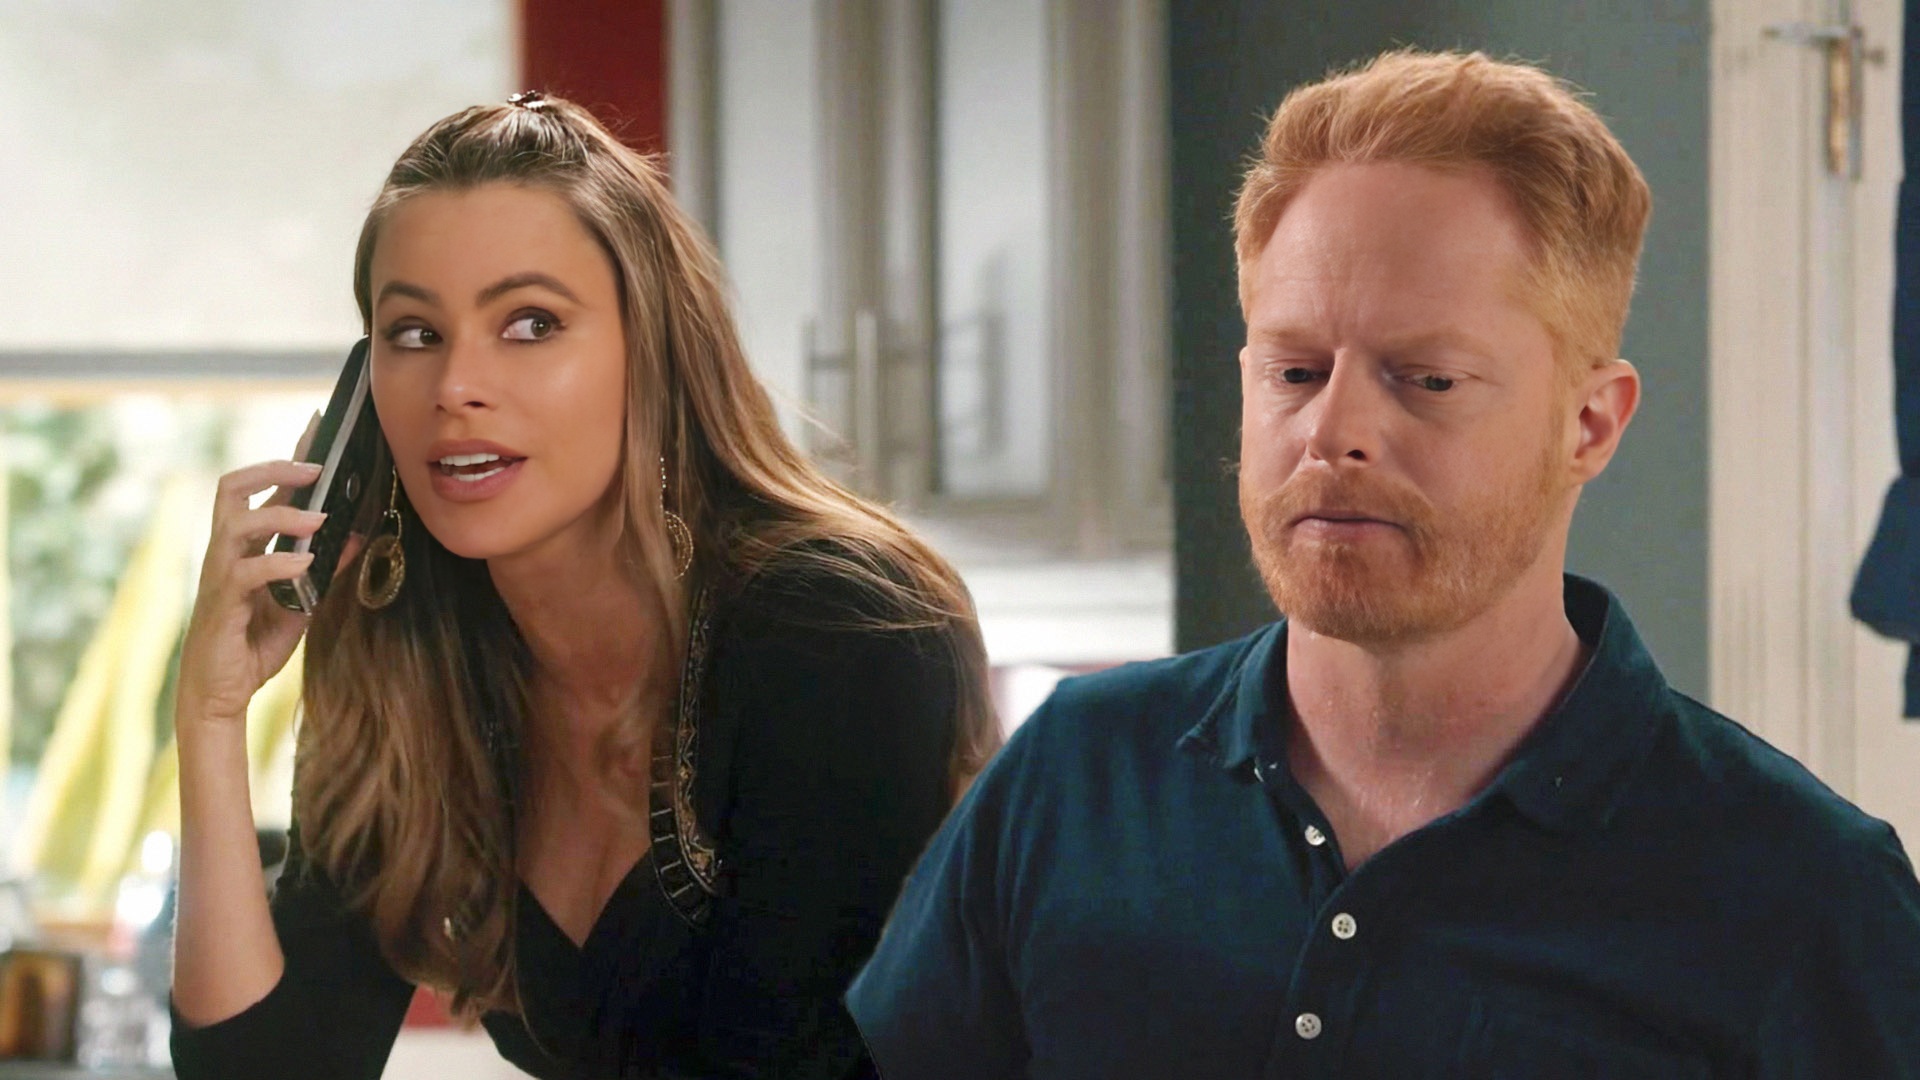 One Reason Why You Shouldn't Expect a Modern Family Reboot Anytime Soon